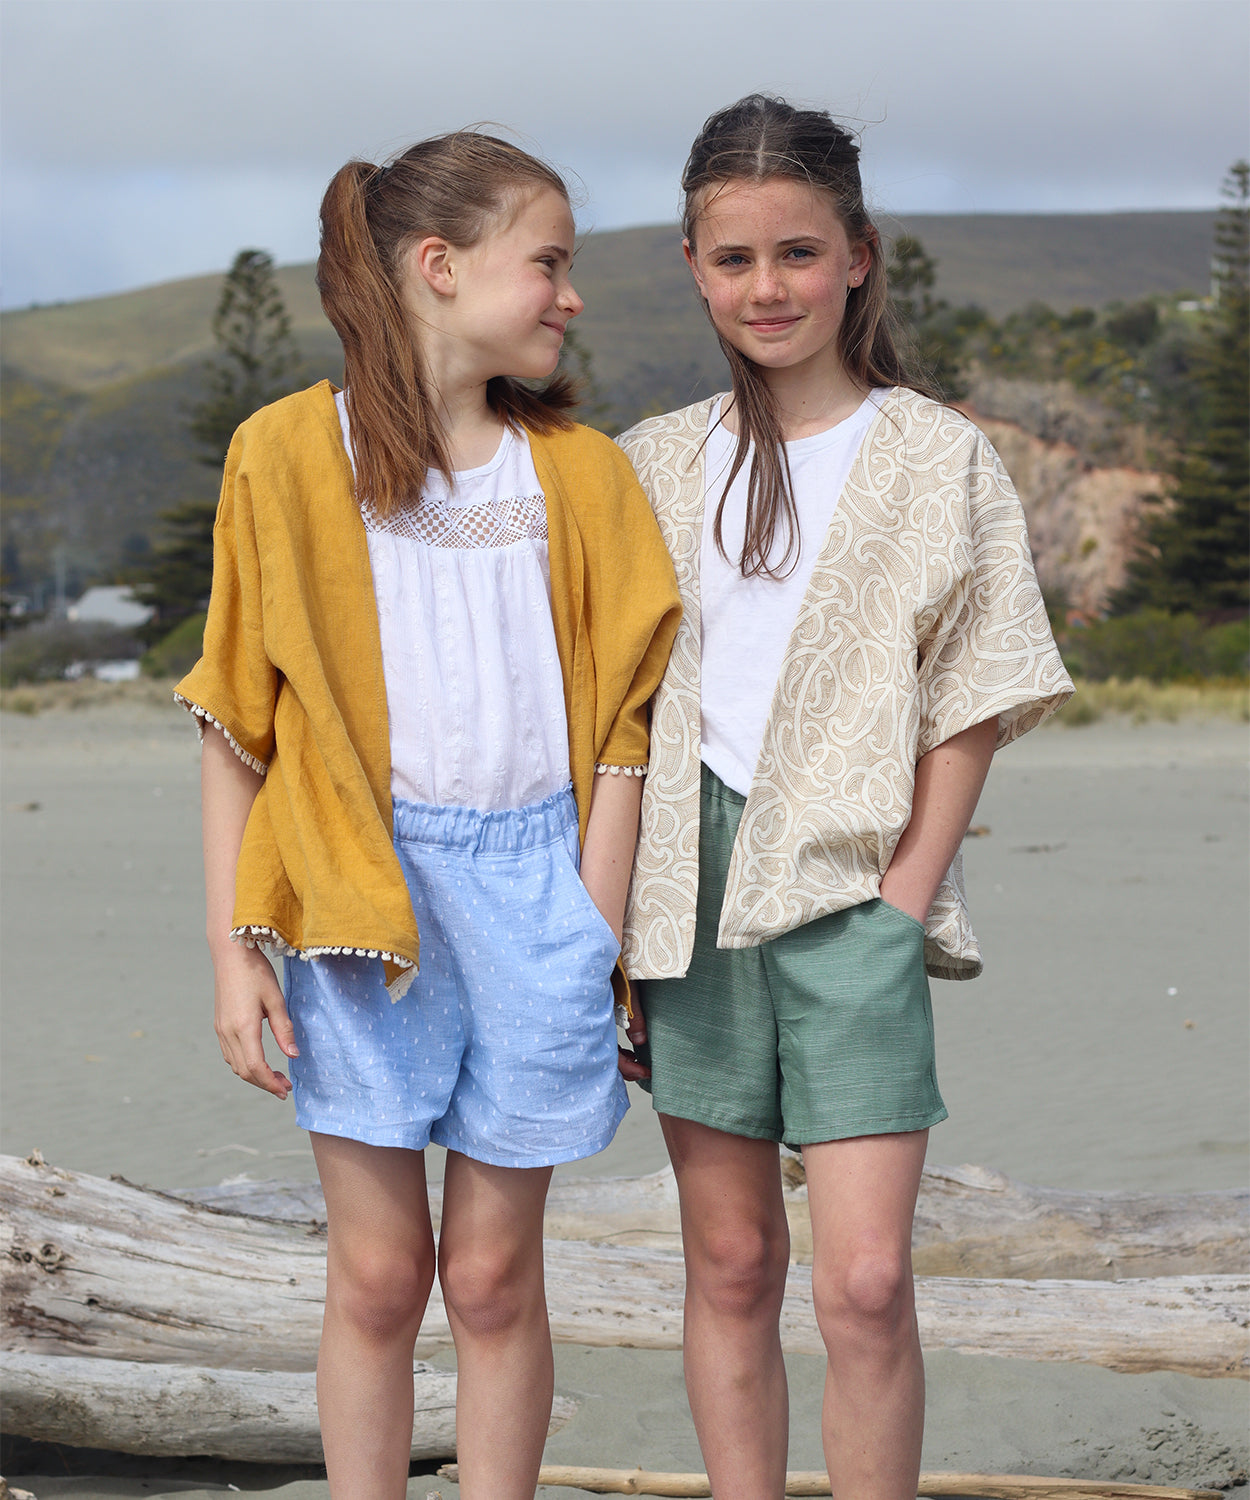 Children wearing the Baby/Child/Teen Tuatua Cover Up sewing pattern from Below the Kōwhai on The Fold Line. A cover up/jacket pattern made in cotton, poly cotton, linen, chambray or tencel fabrics, featuring a boxy shape, relaxed fit, open front, elbow le